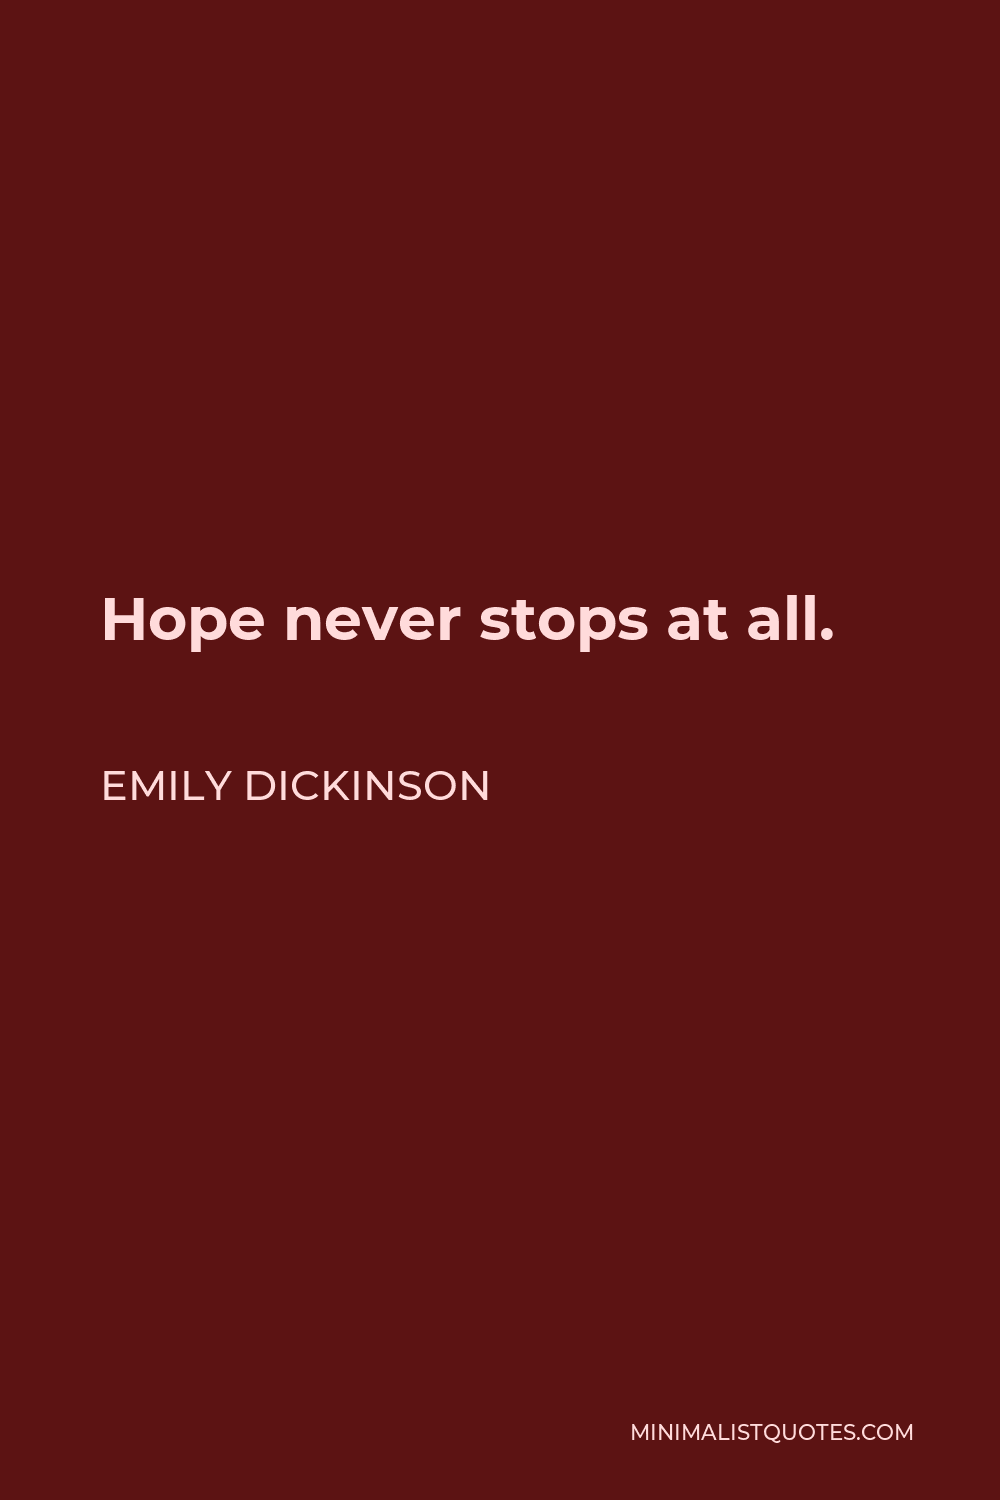 Emily Dickinson Quote - Hope never stops at all.